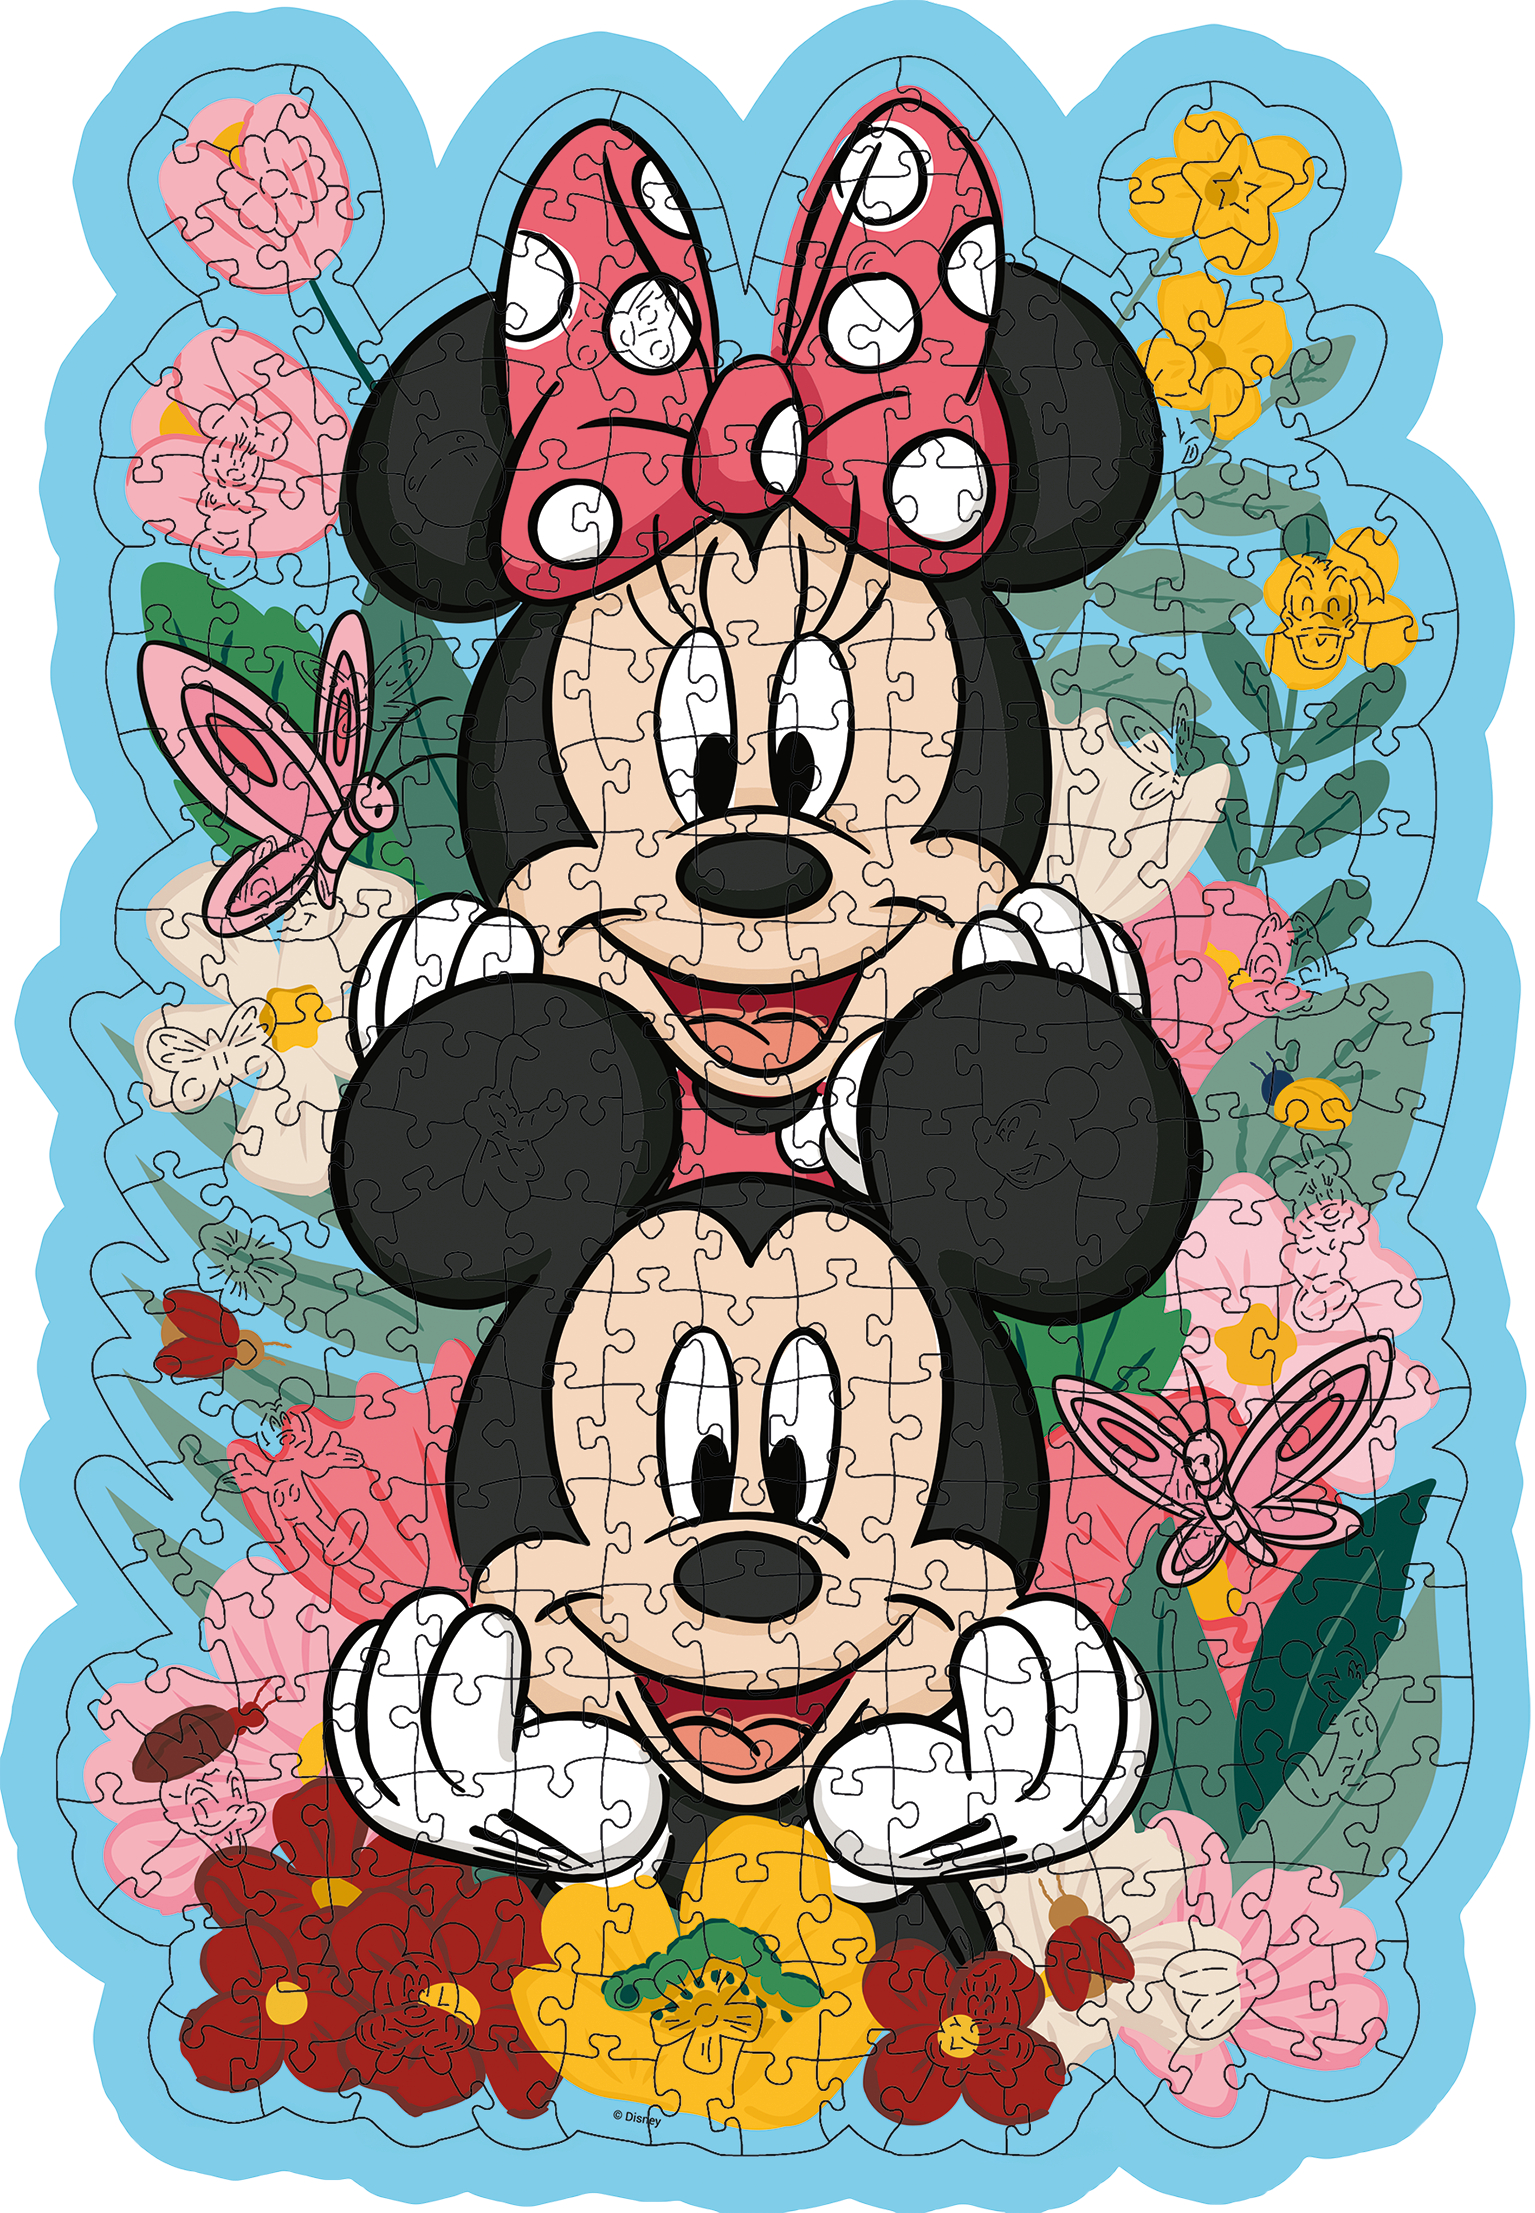 Ravensburger Holzpuzzle - Mickey & Minnie 300 Teile Puzzle Ravensburger-00762 von Ravensburger